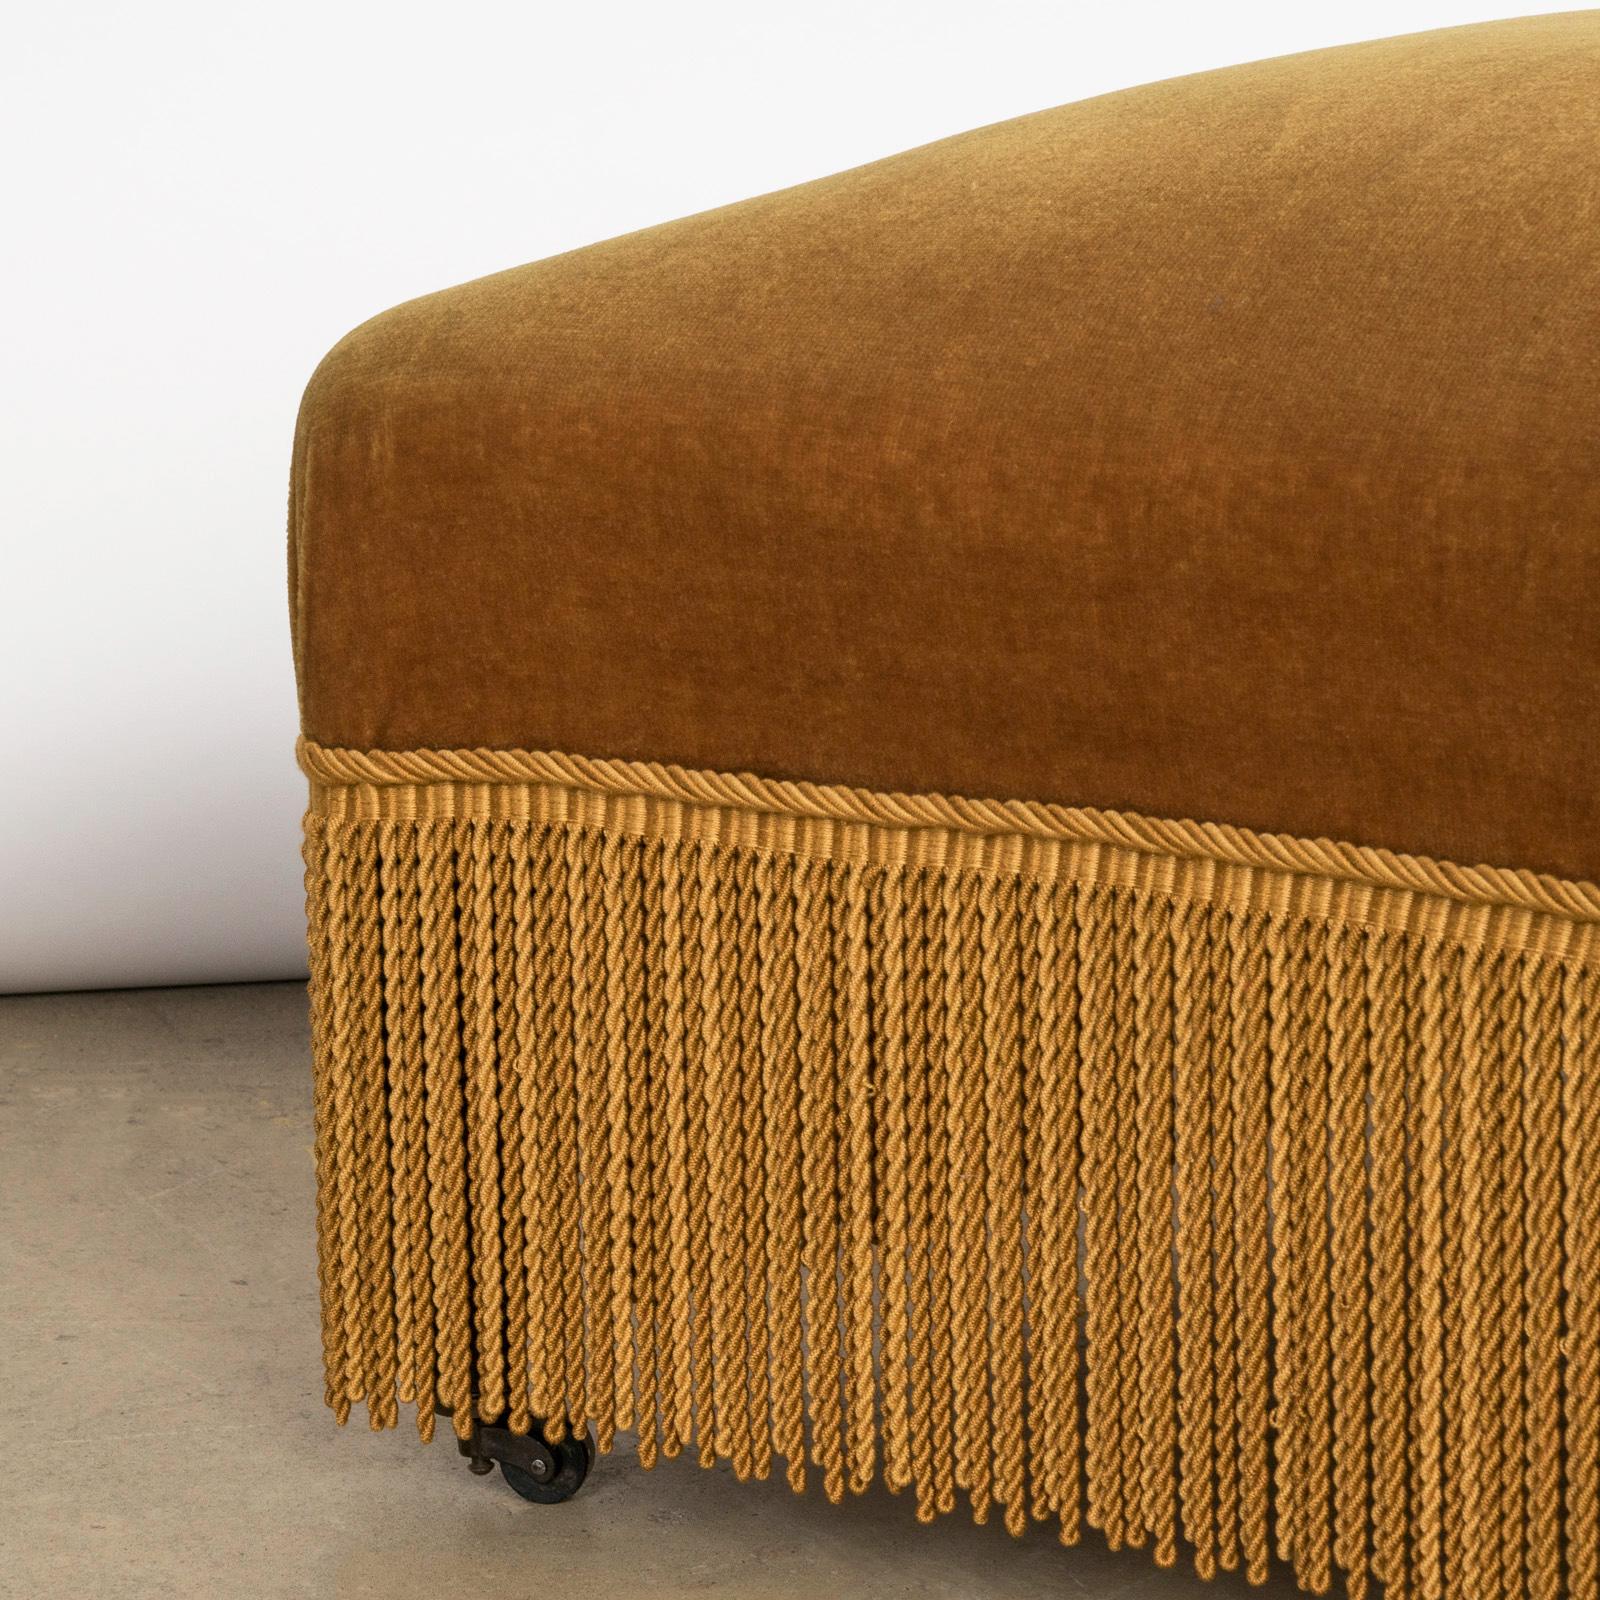 Delight in the charm of this French 19th-century Napoleon III style stool or foot bench, featuring an elegant mustard velvet upholstery.

The vintage velvet upholstery has been cleaned and remains in great condition. While we appreciate the allure